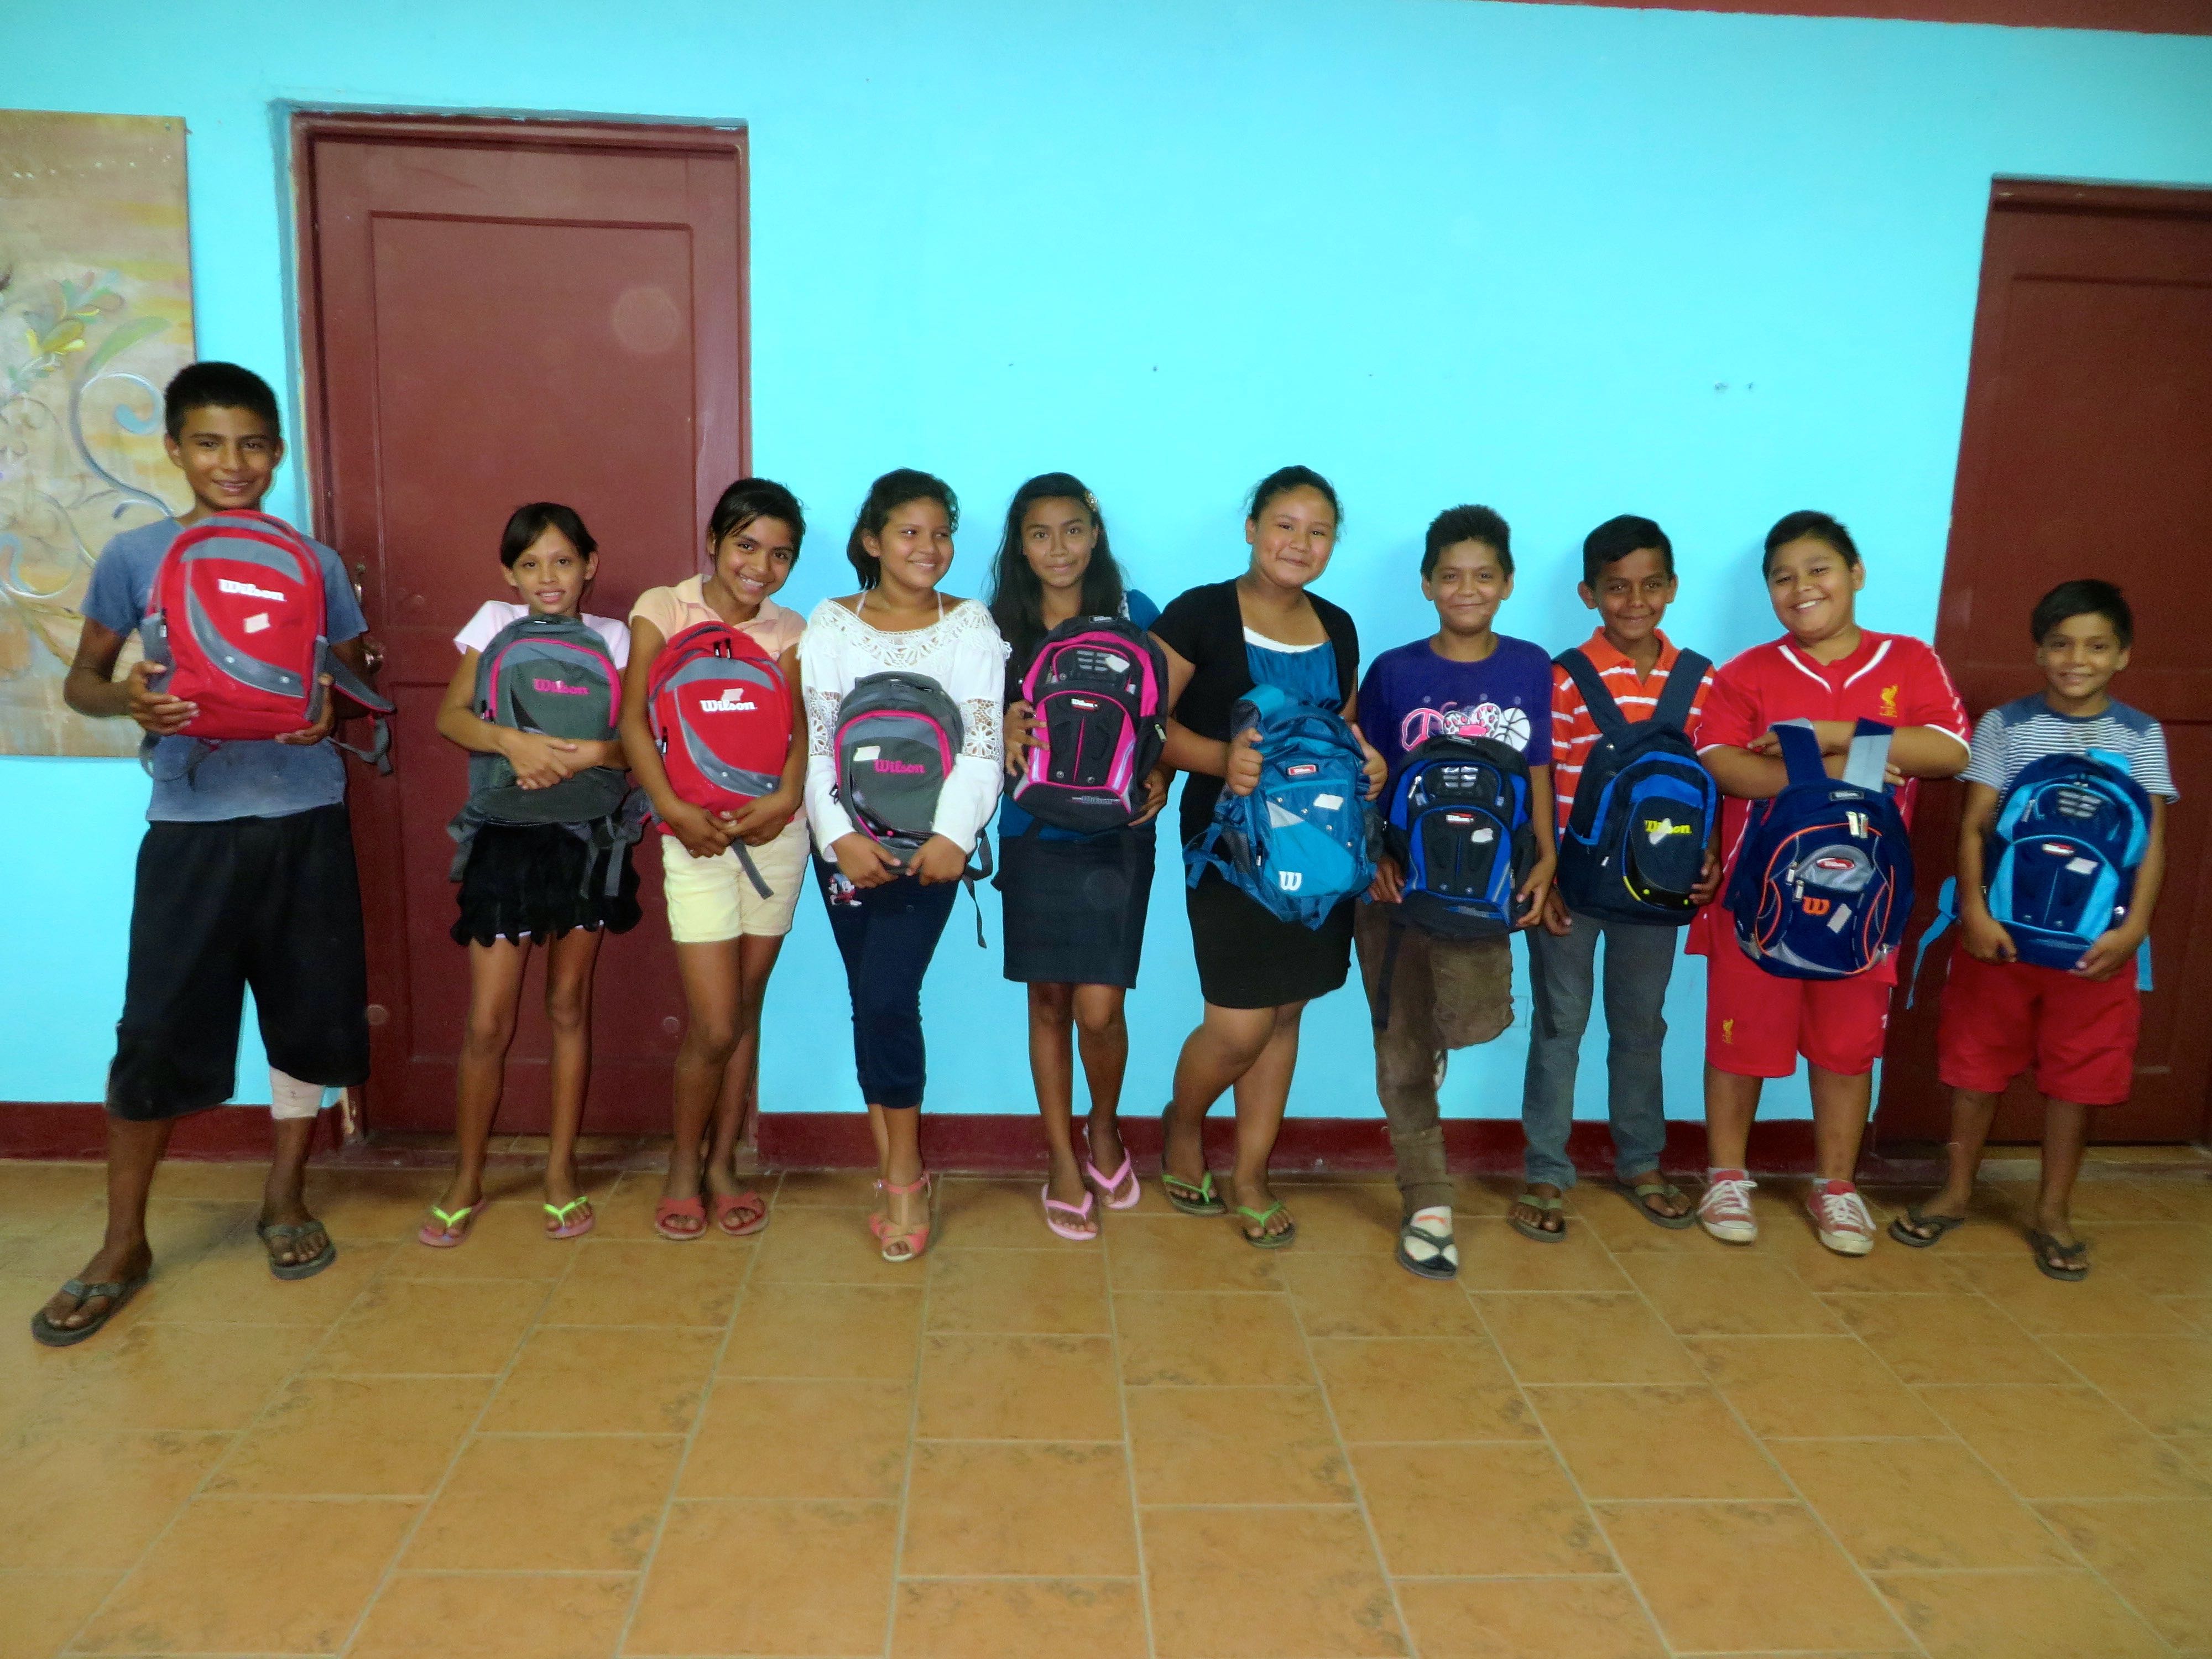 Our 6th grade students from Candelaria. These students are ready for their last year of elementary school. 